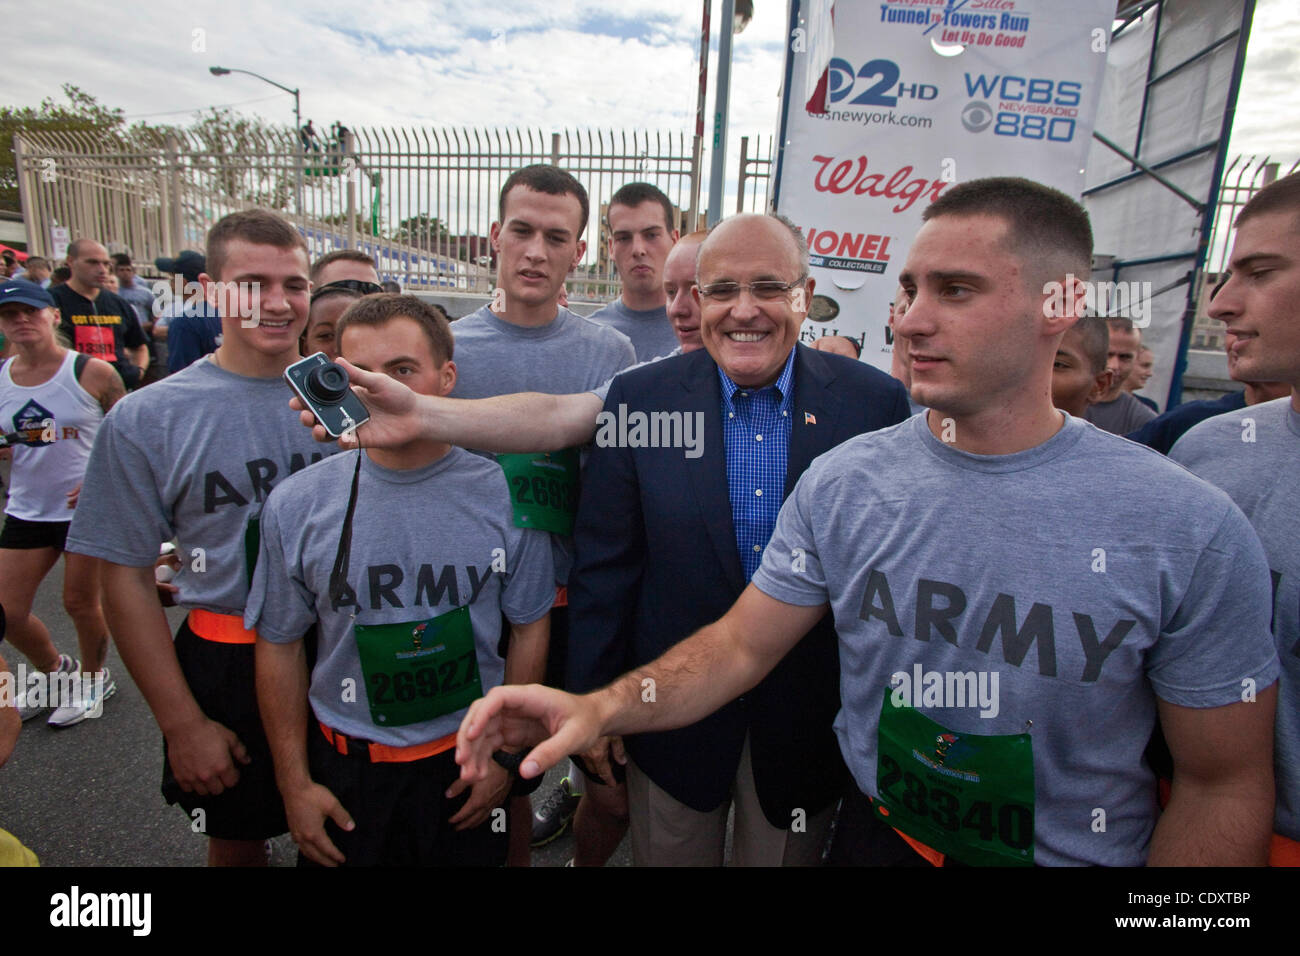 Sept. 25, 2011, New York, New York, U.S. - RUDY GIULIANI, mayor of New York during the Sept. 11 Twin towers attack, stands with West Point Army cadets posing for pictures.  Thousands of relatives and friends of World Trade Center terror attack victims participated in the annual five-kilometer event  Stock Photo